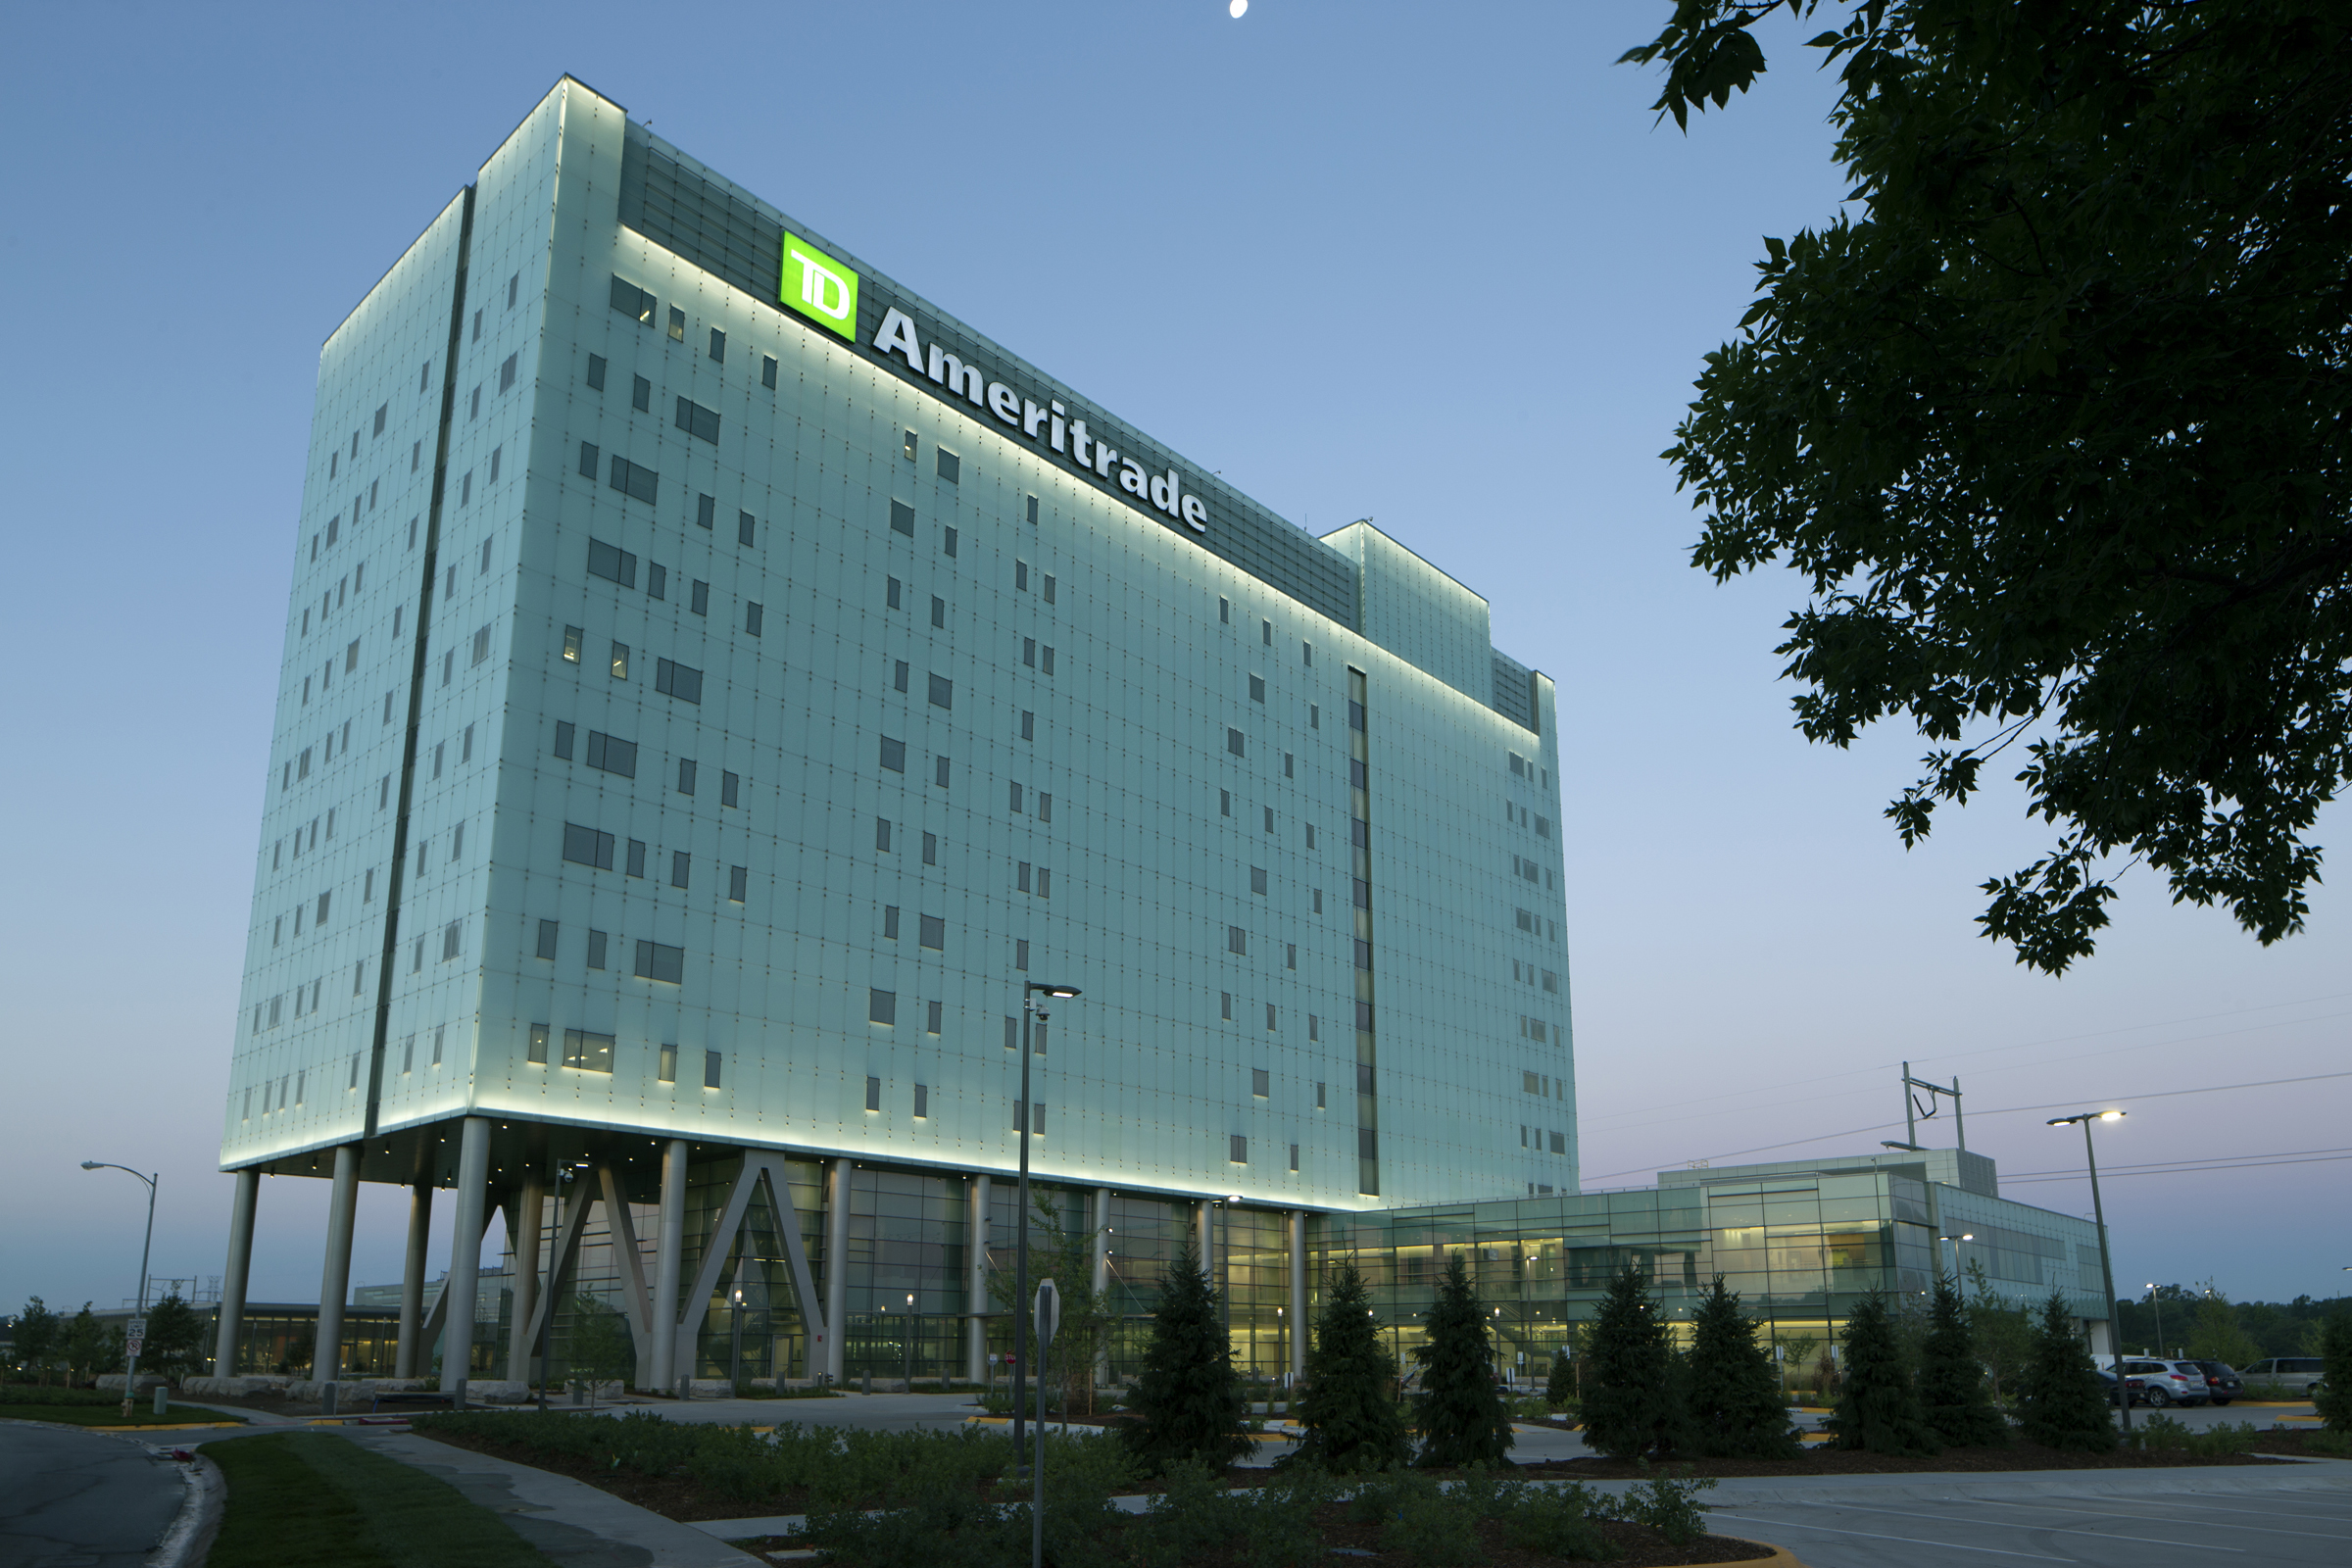 Sustainability is the Focus as TD Ameritrade Marks Opening of "Green&q...